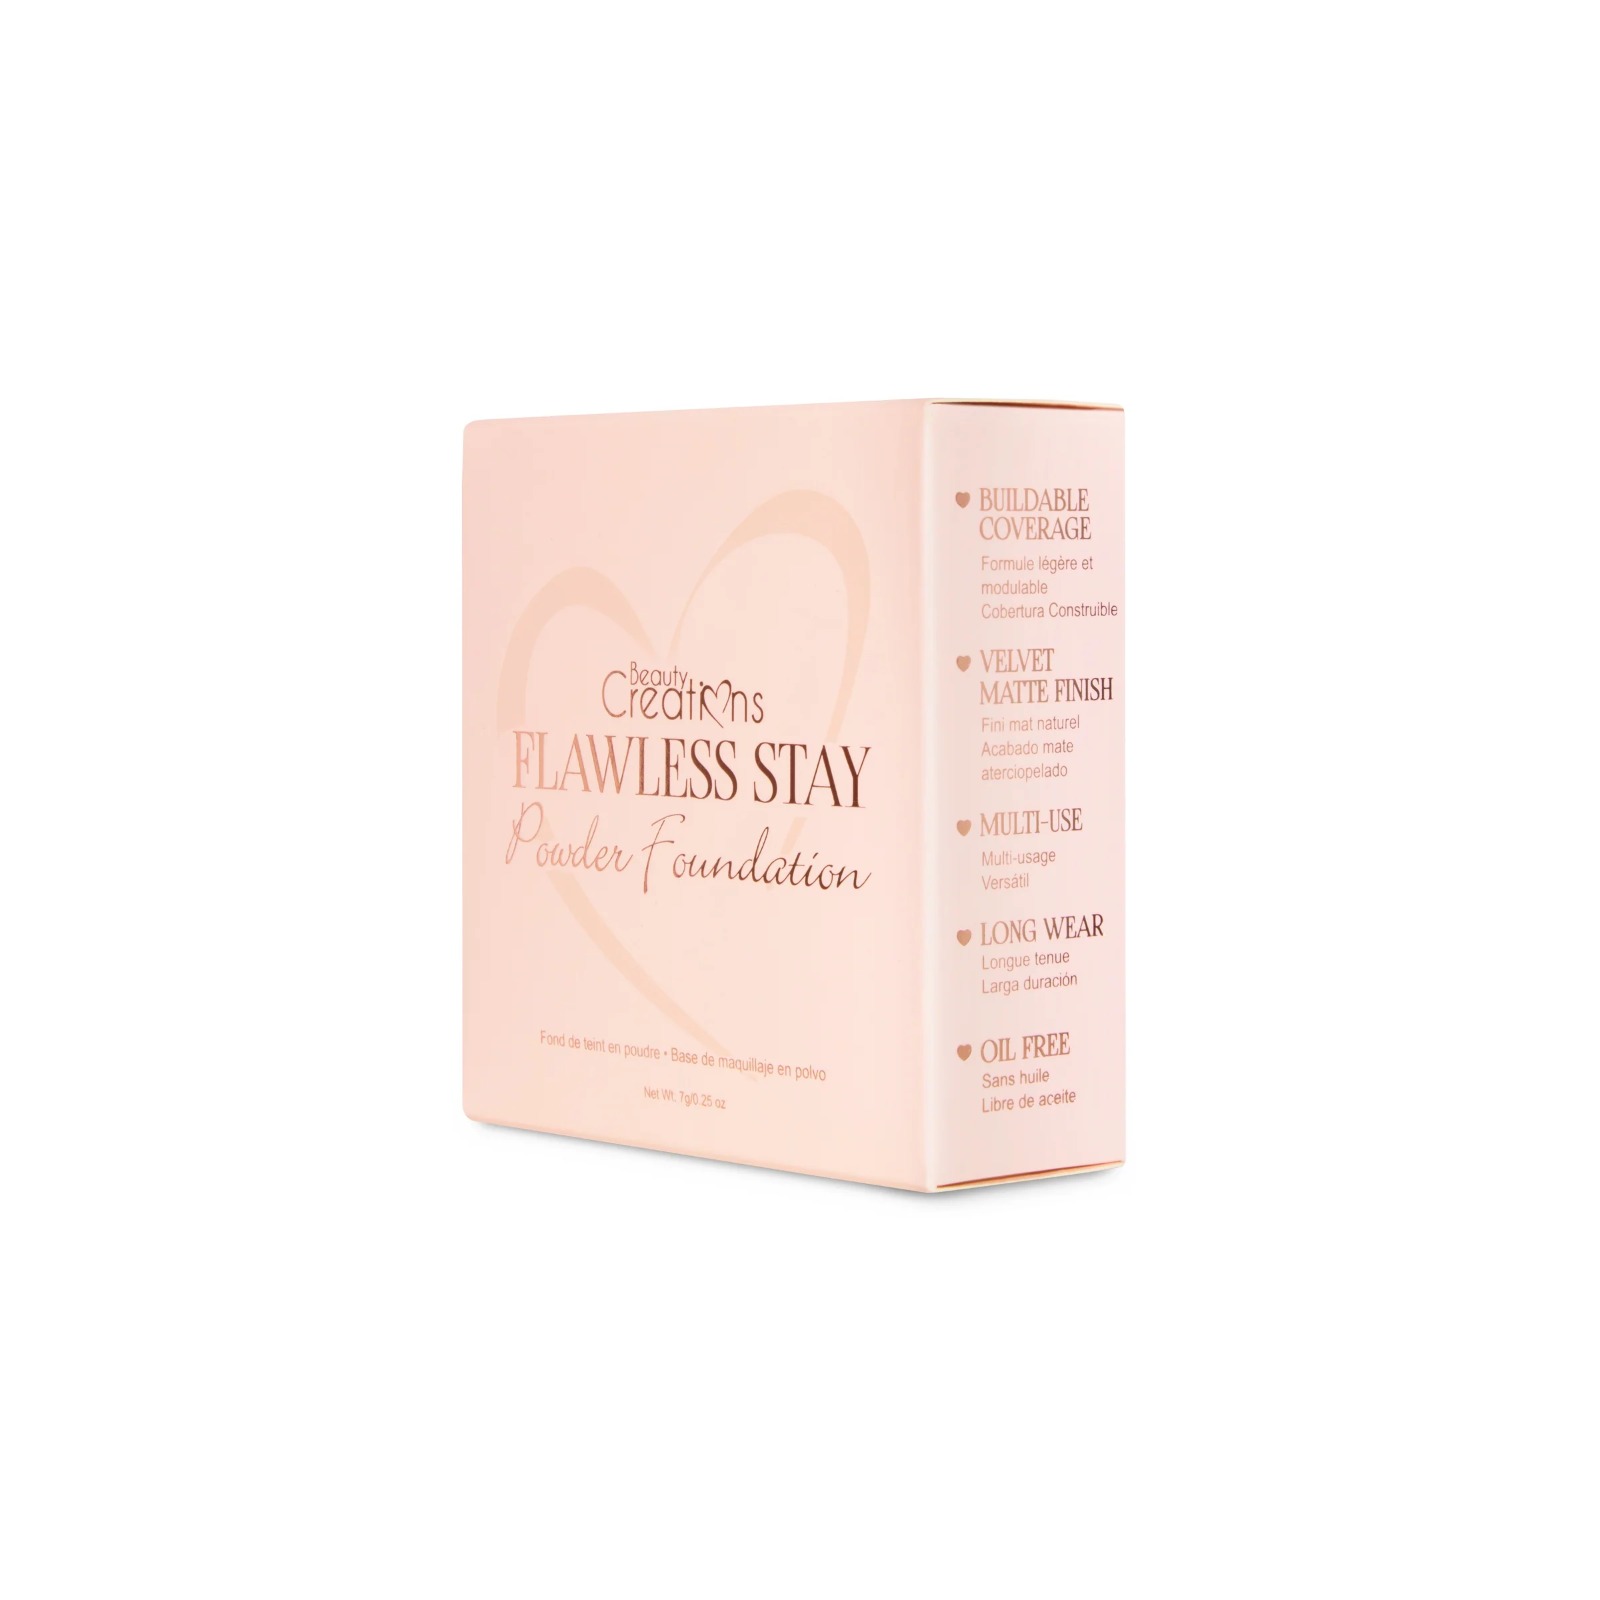 Beauty Creations - Flawless Stay FSP 2.5